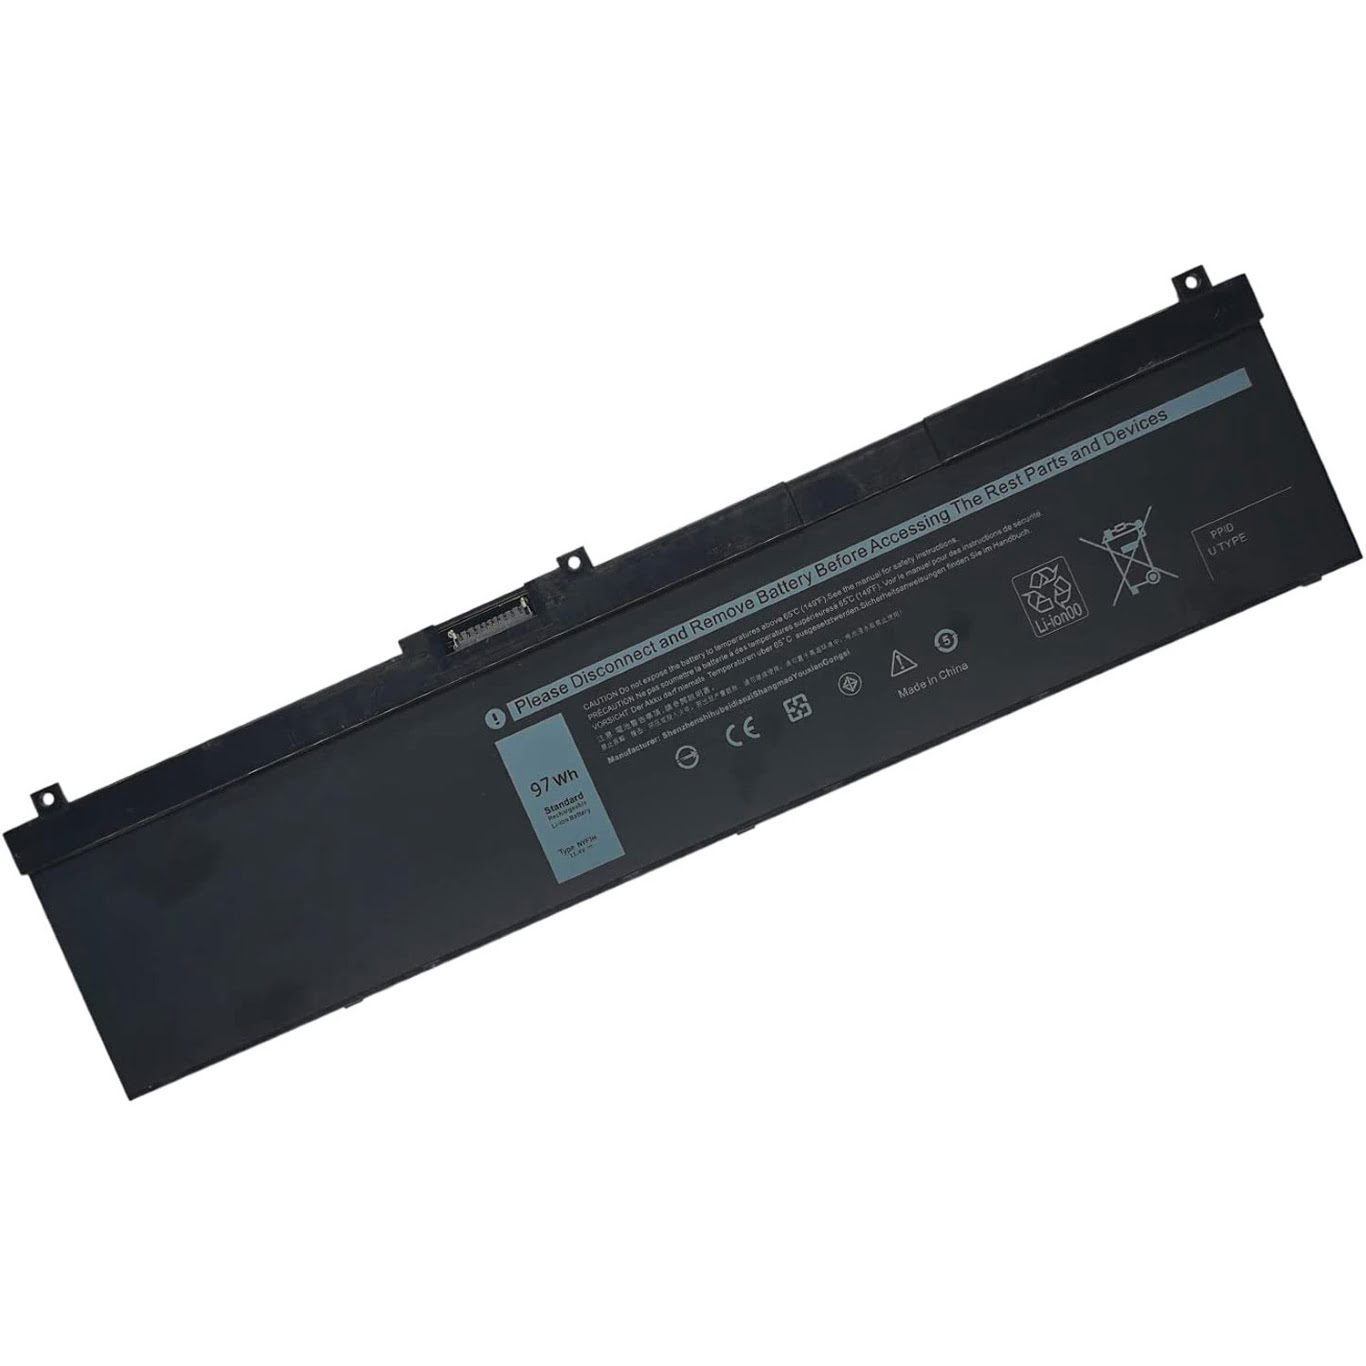 Dell Latitude XT2 Tablet PC Laptop Batteries for Dell replacement